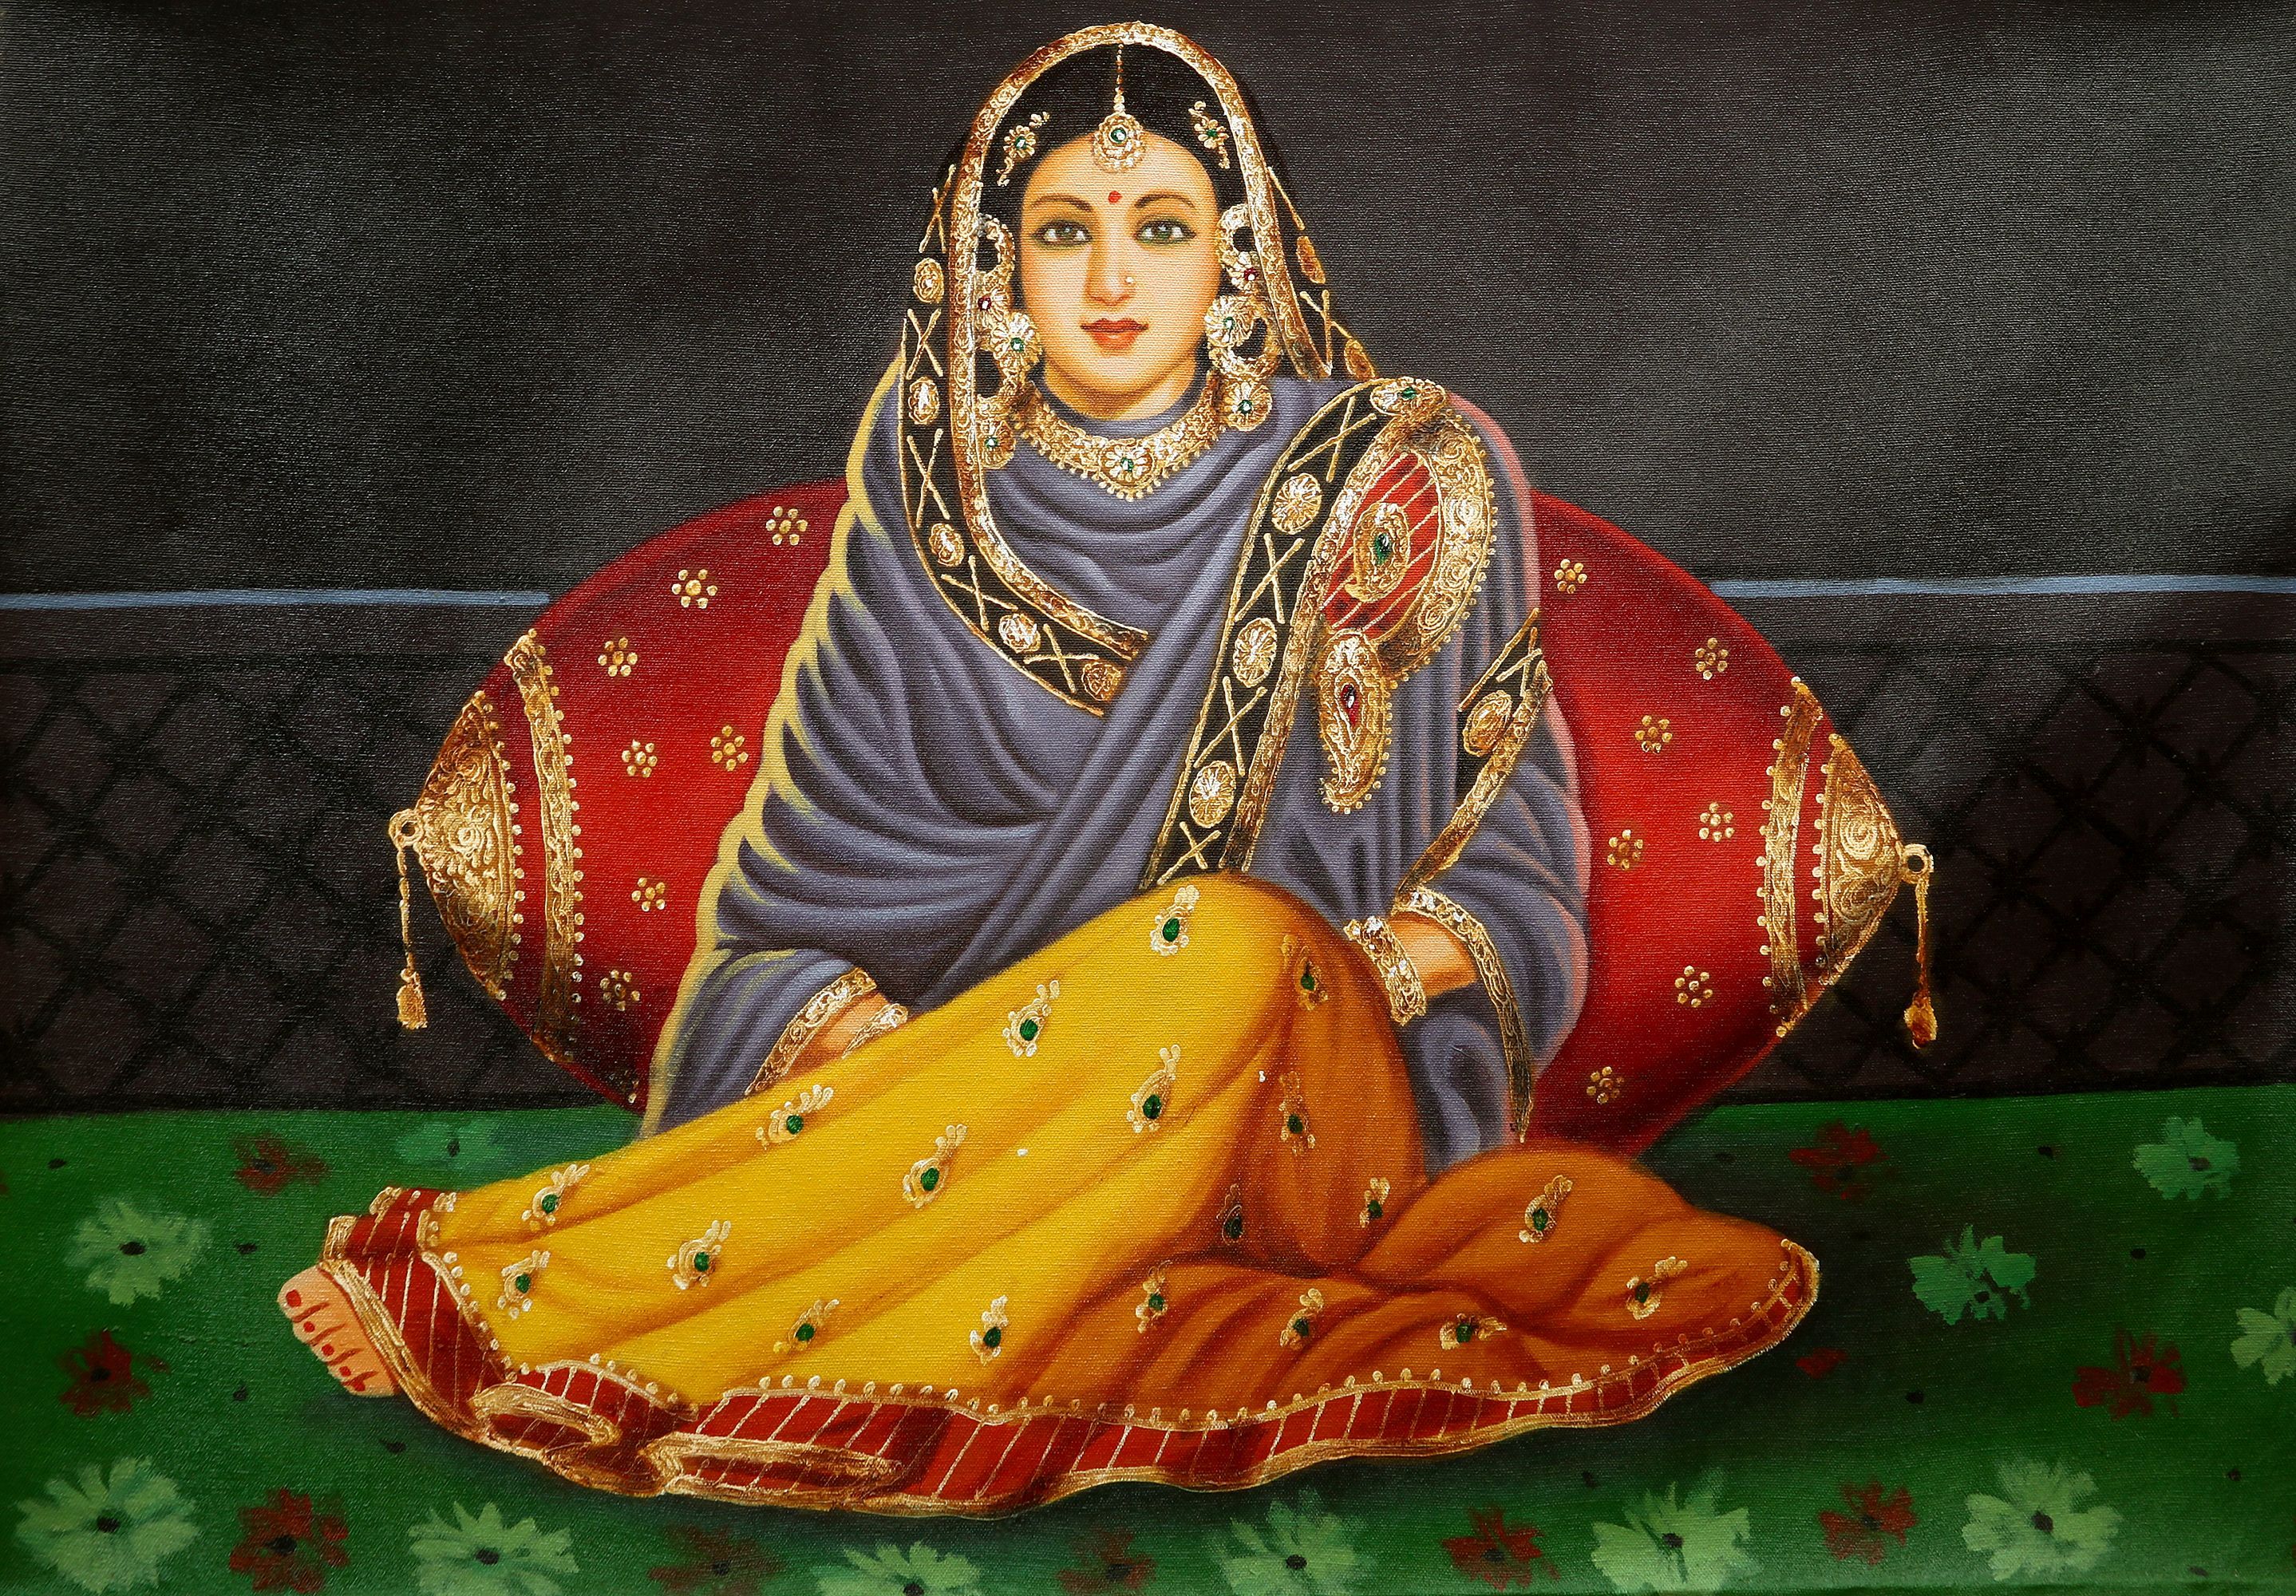 The Queen. Indian traditional paintings, Mughal miniature paintings